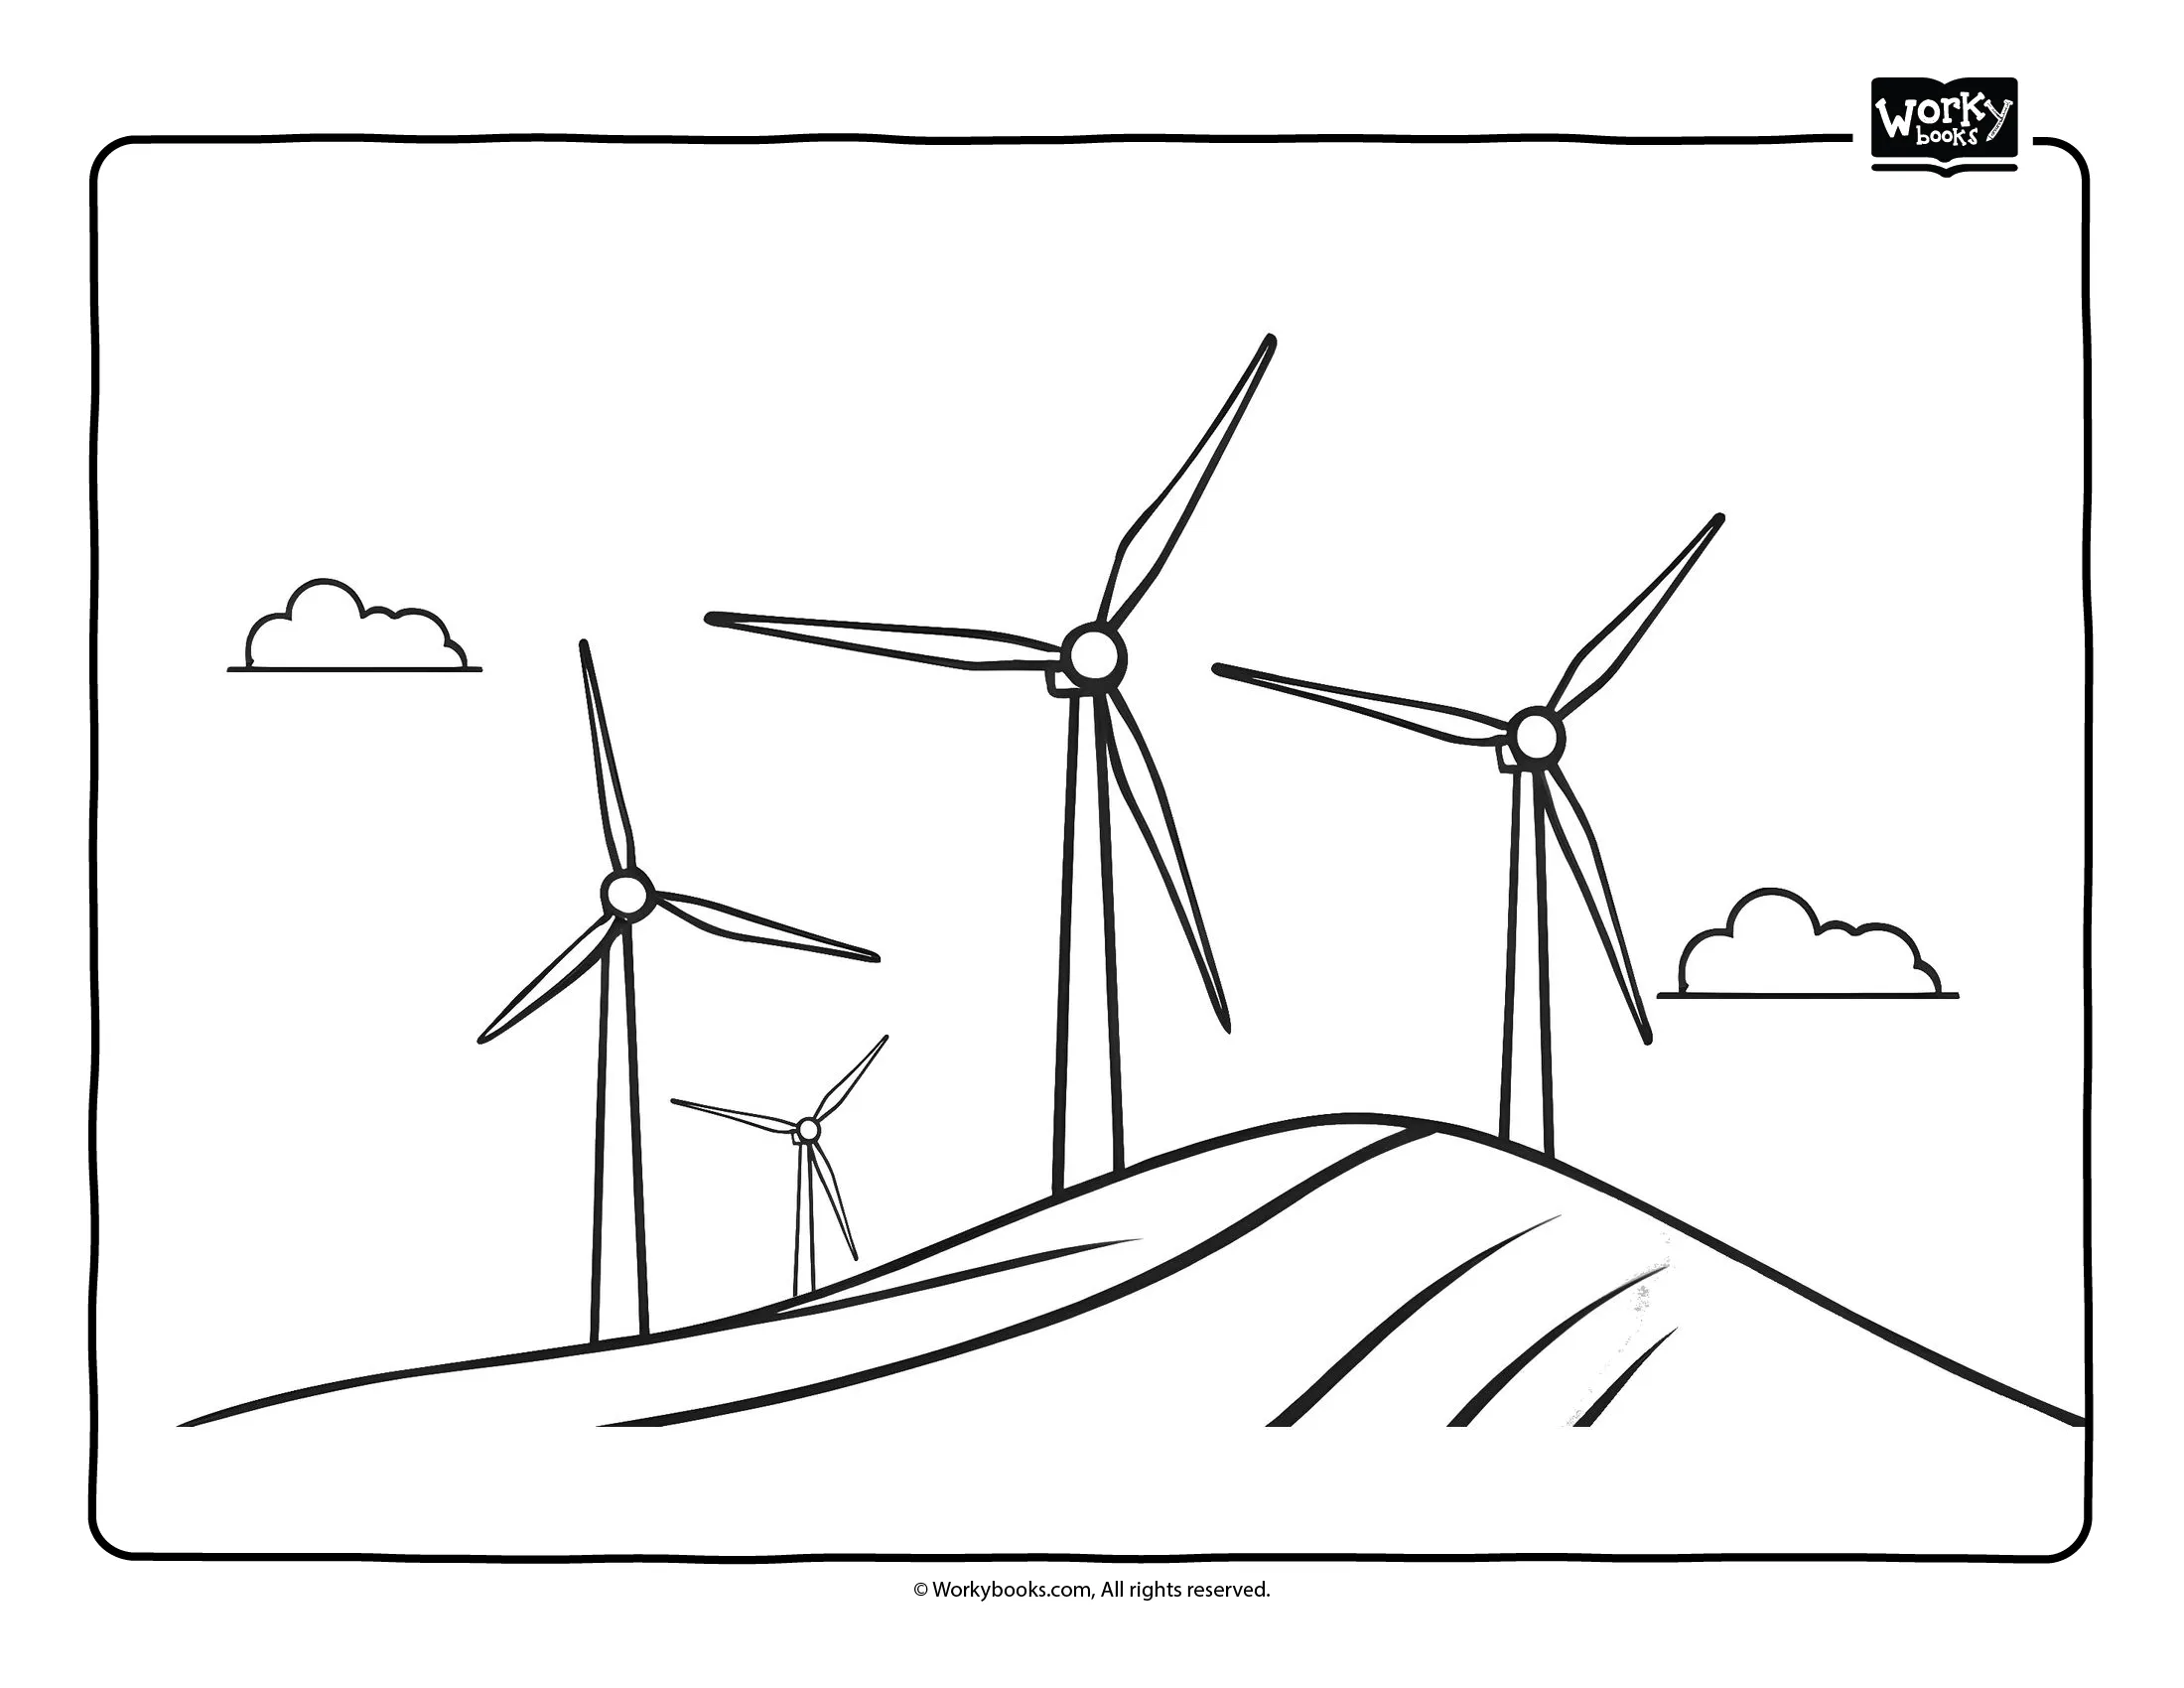 Wind energy coloring page